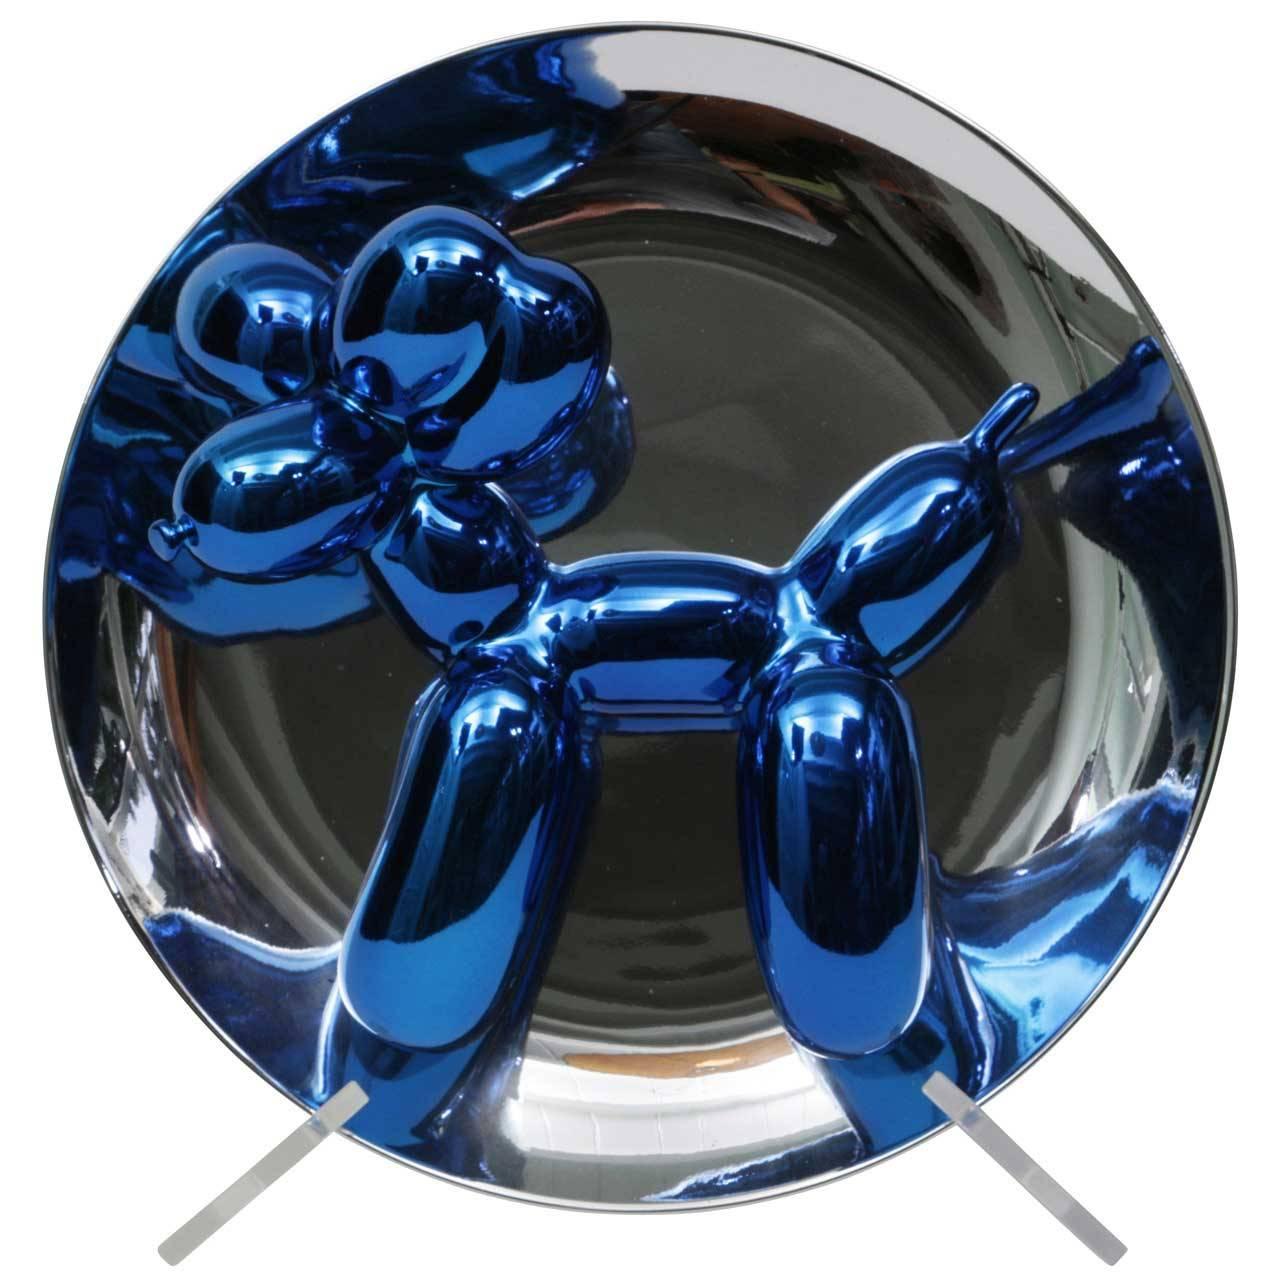 Jeff Koons "Balloon Dog" Sculpture in Blue, Original with Authentication